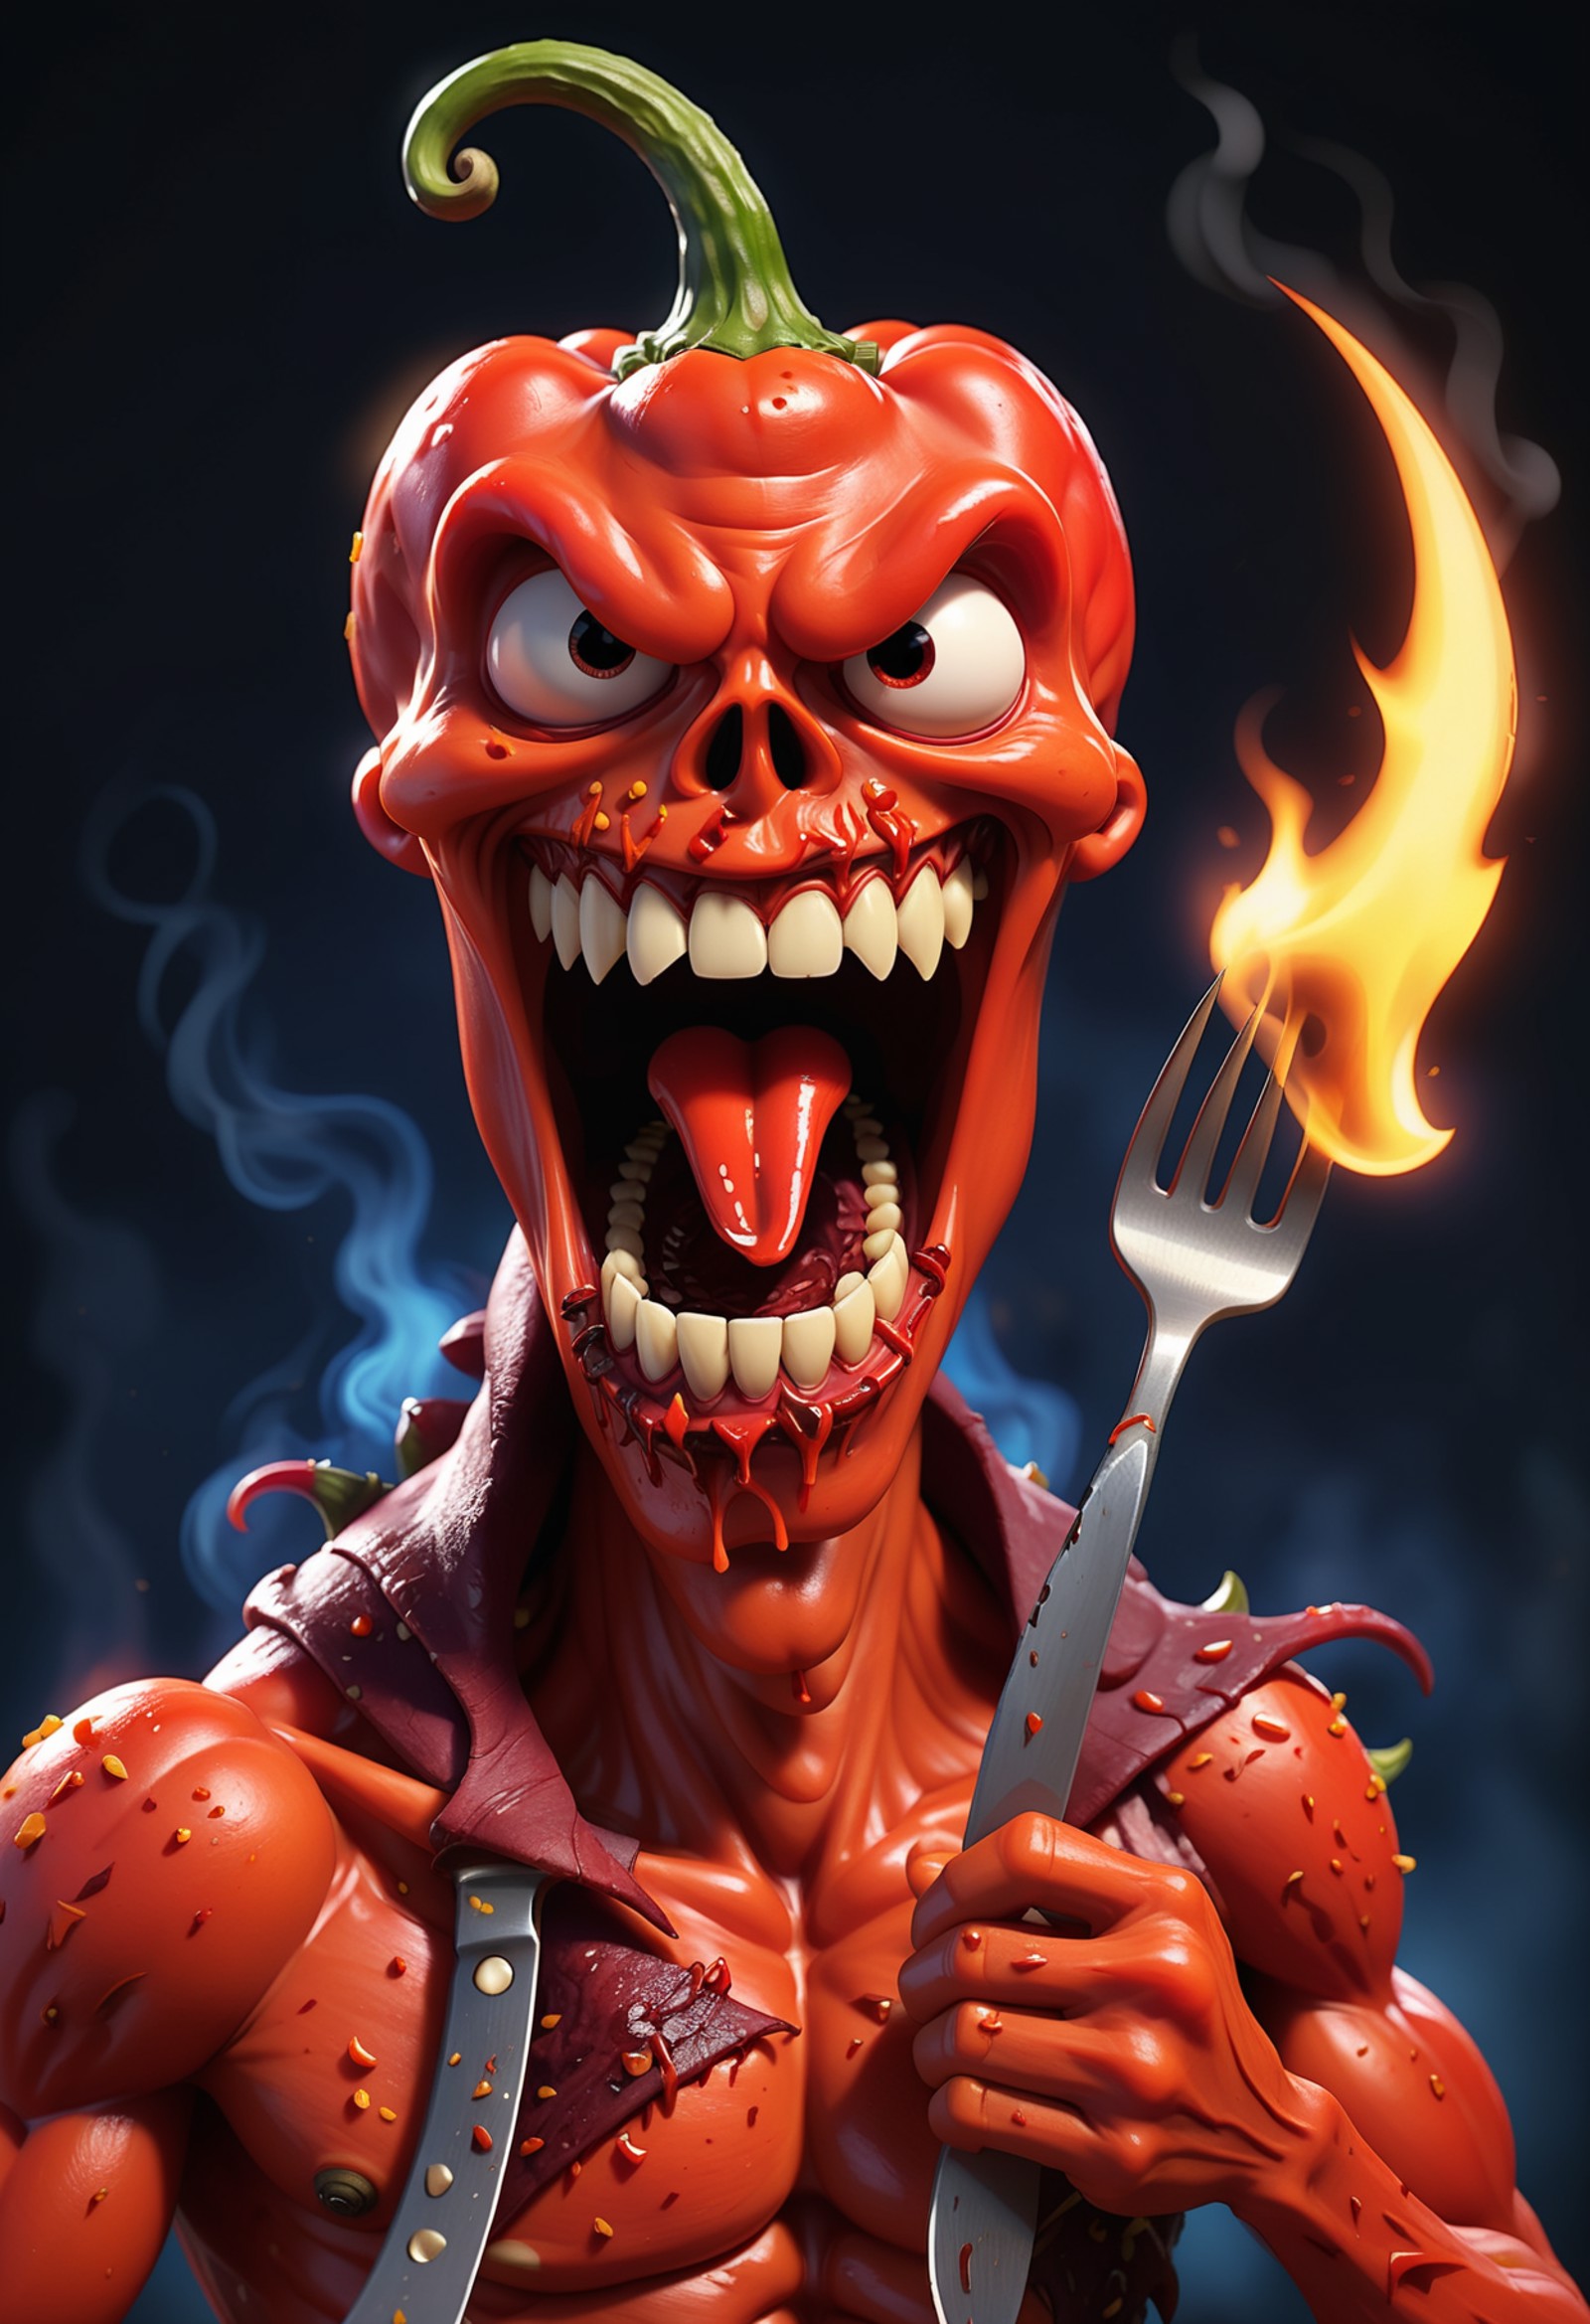 Disney pixar animation of the hottest red pepper in the world with a face mode of ral-drp, California Reaper, on fire, rea...